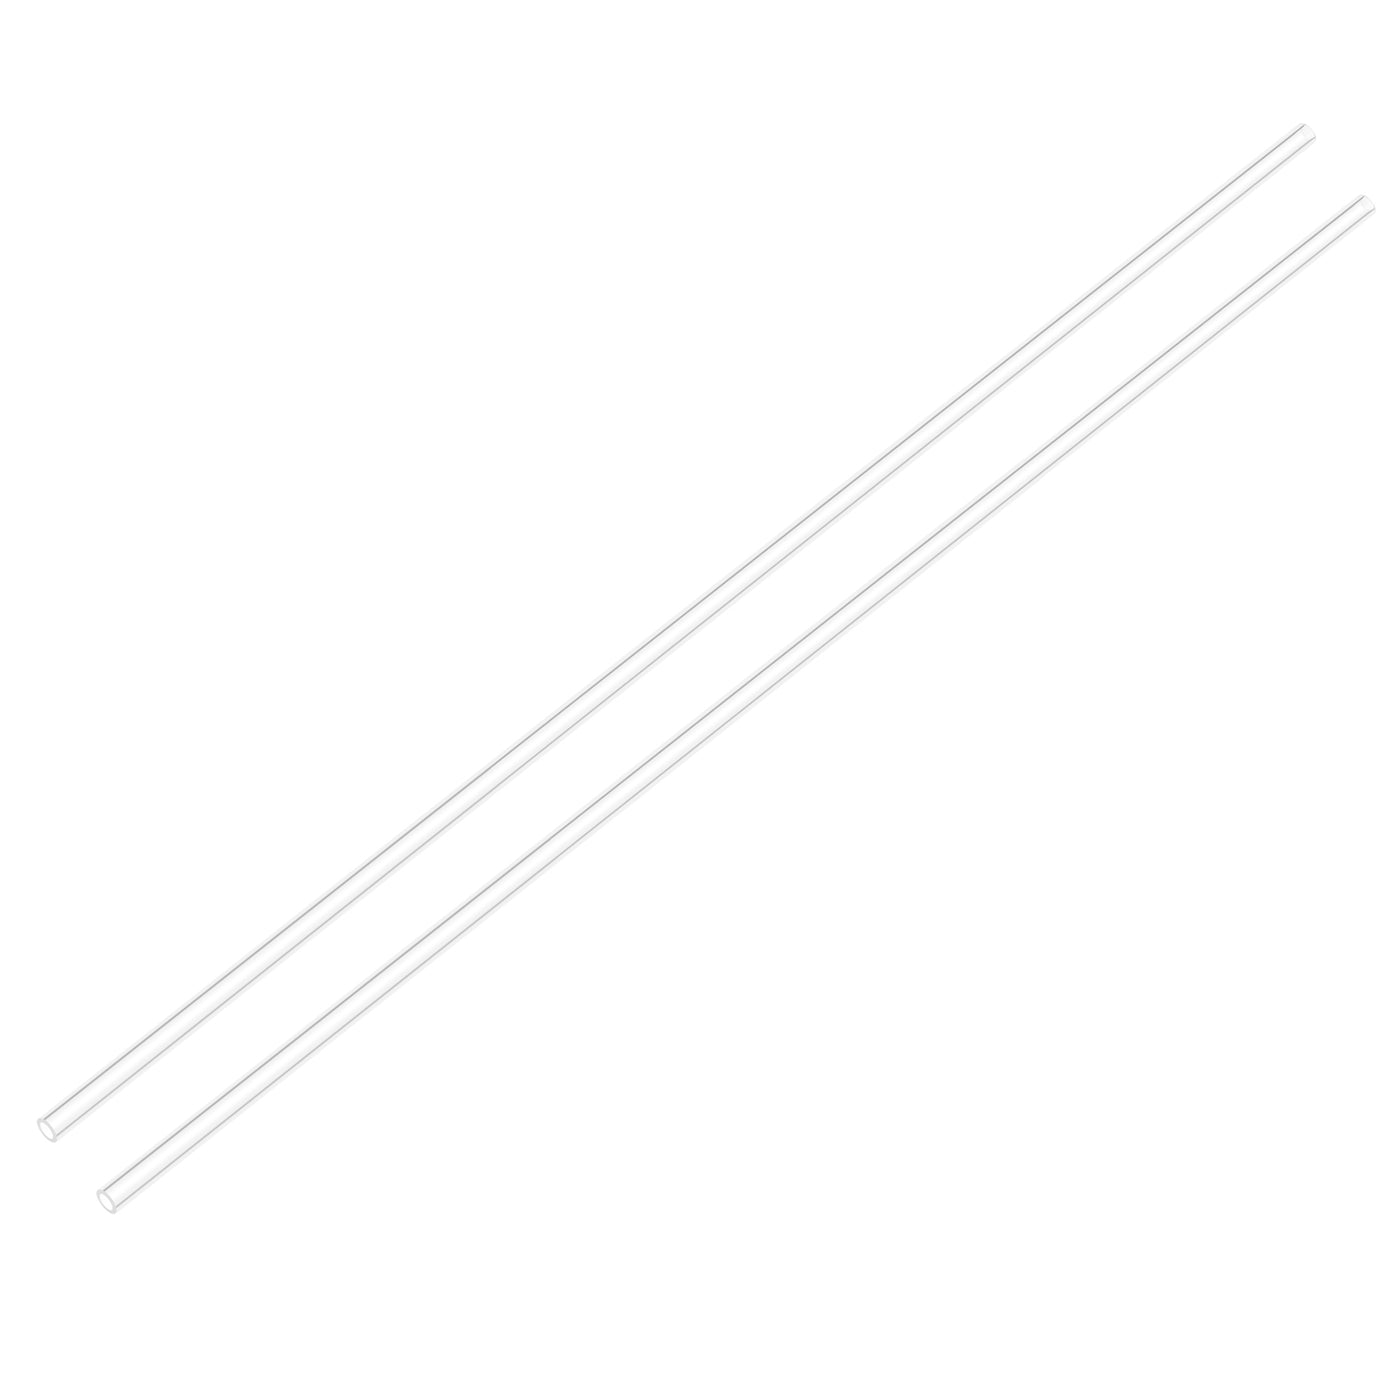 uxcell Uxcell 2pcs Clear Rigid Acrylic Pipe 5mm ID x 8mm OD x 610mm, 1.5mm Wall Round Tube